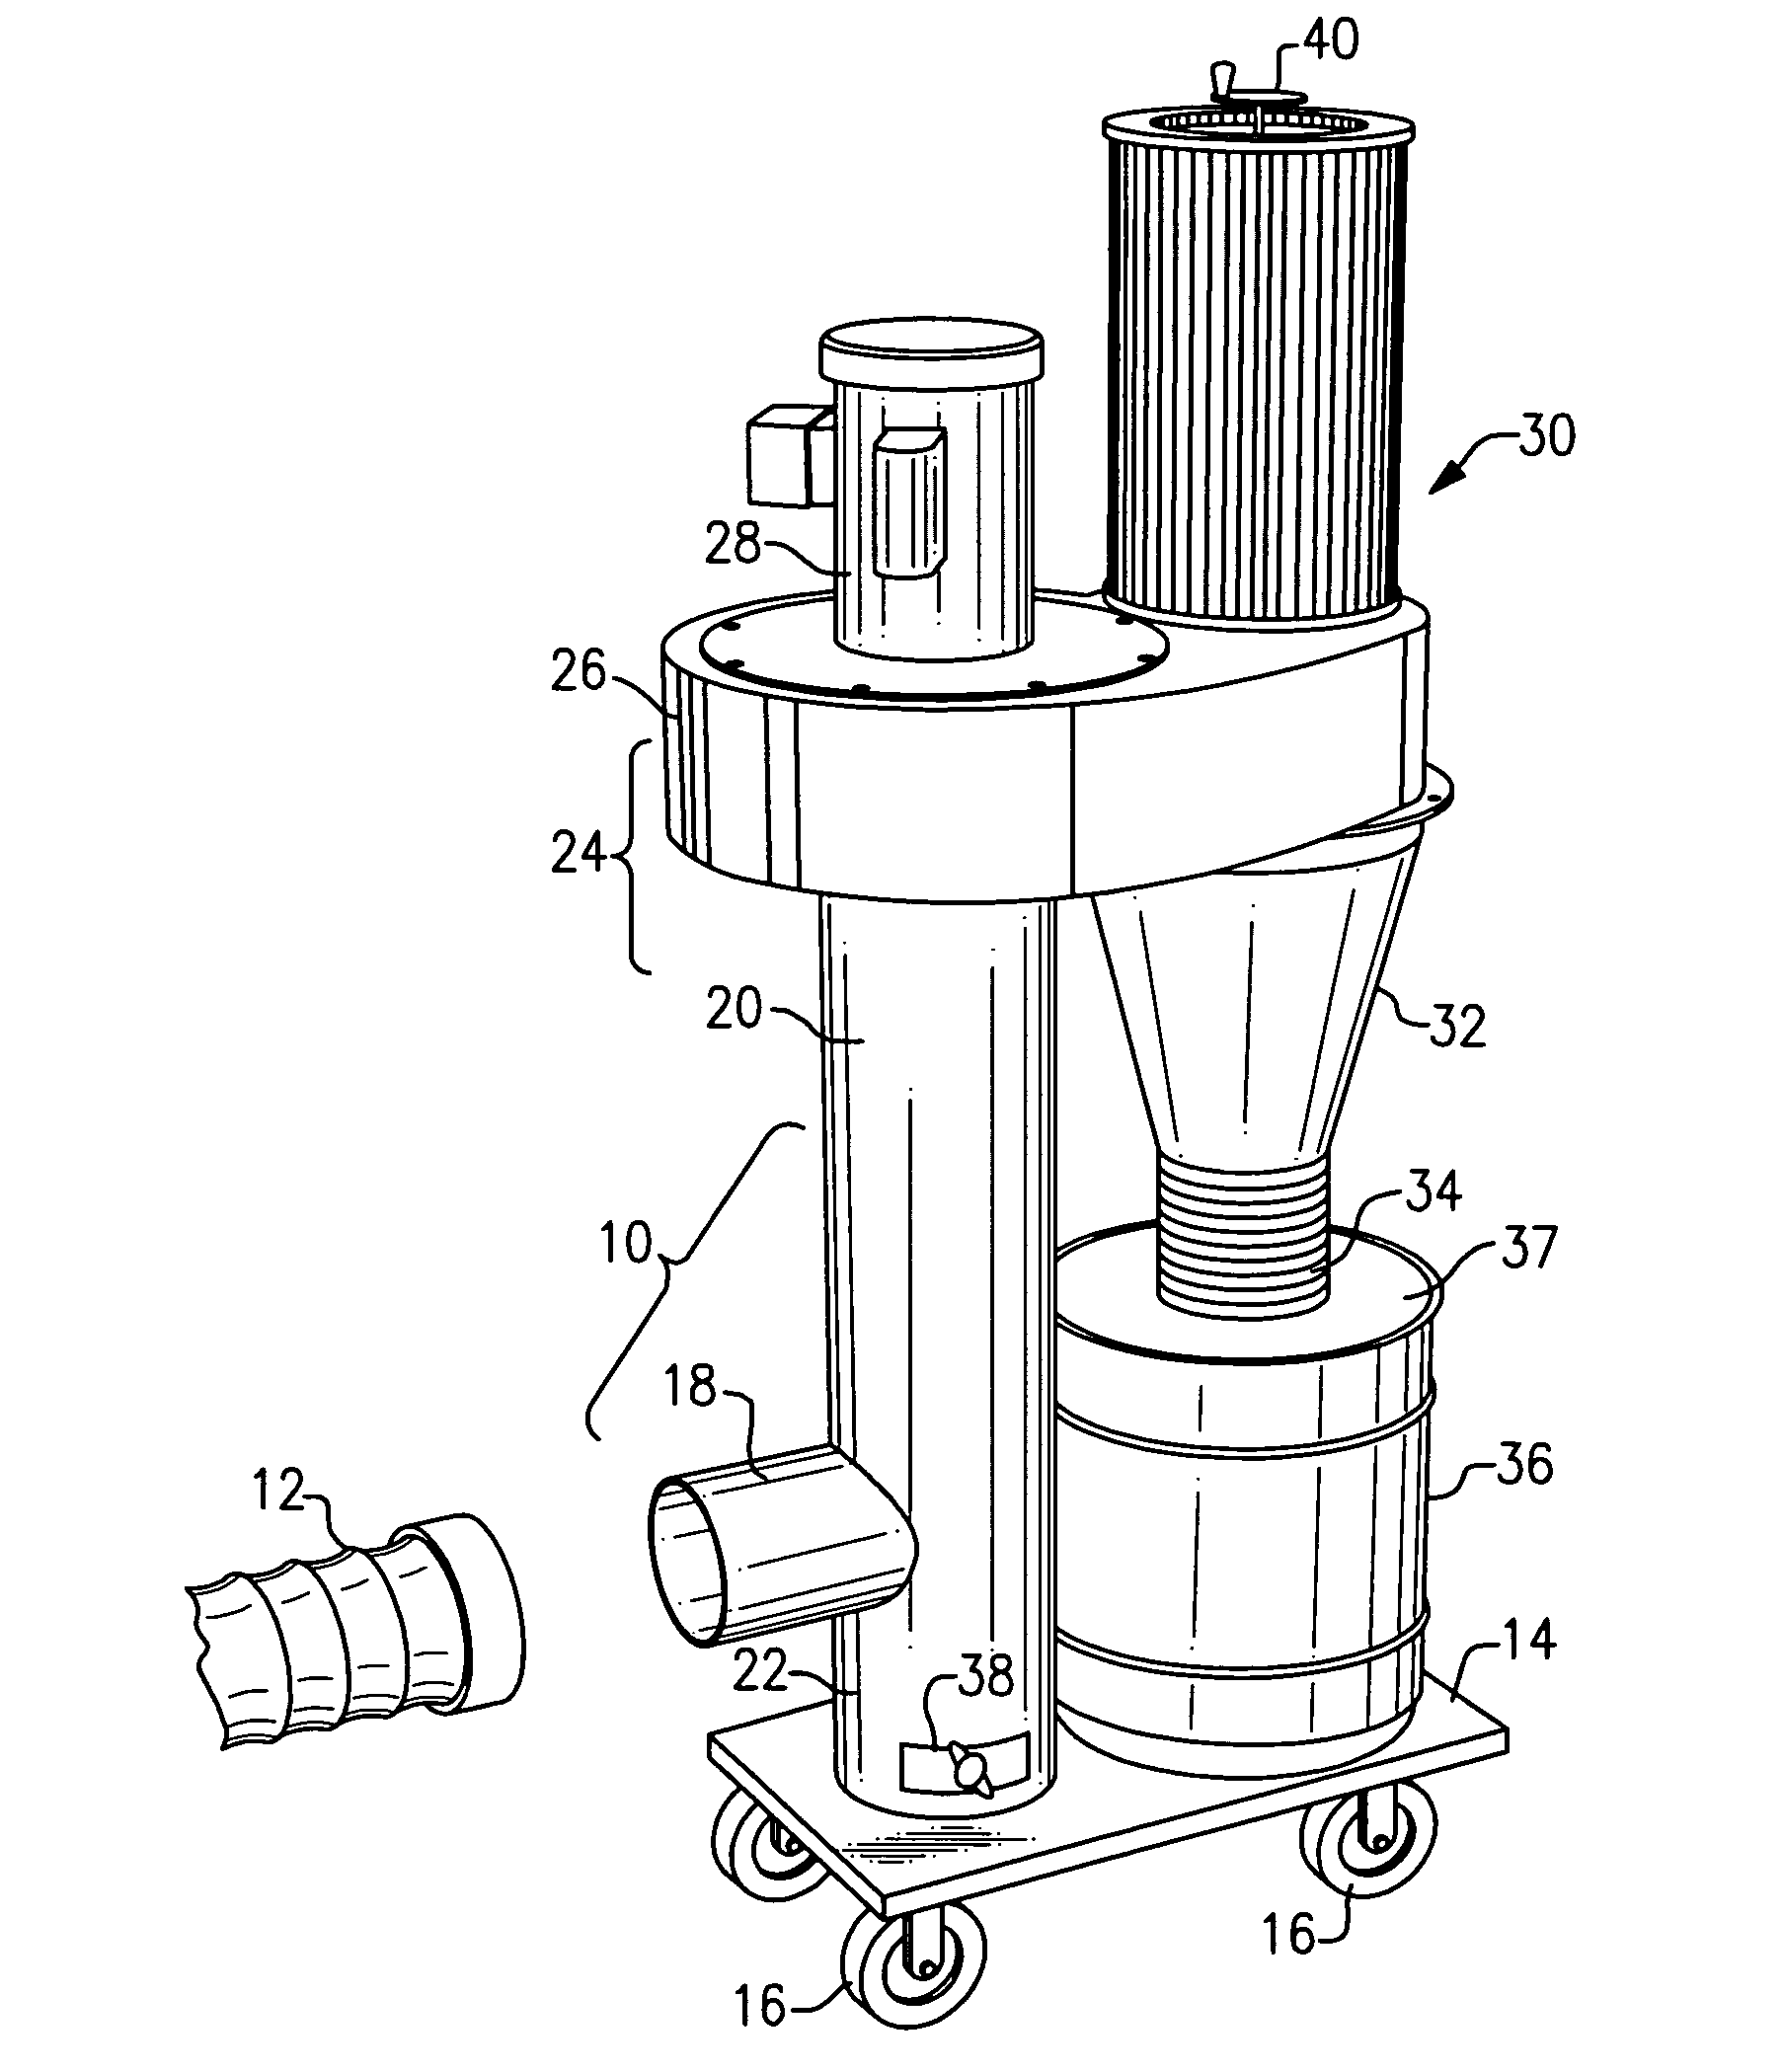 Portable cyclonic dust collection system